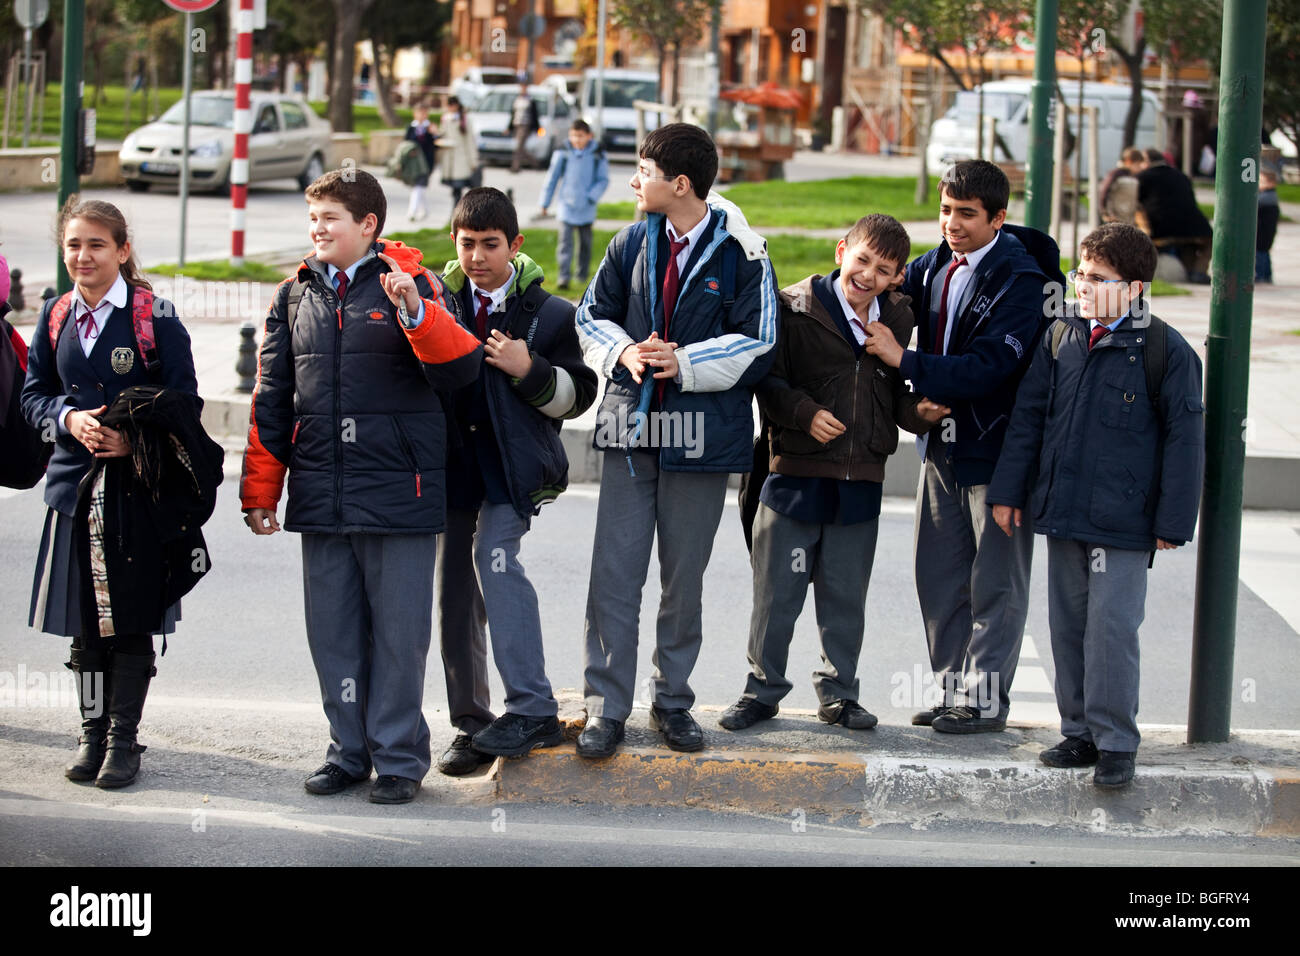 Turkish pupils on their way from school in Eyup, Istanbul, Turkey Stock Photo